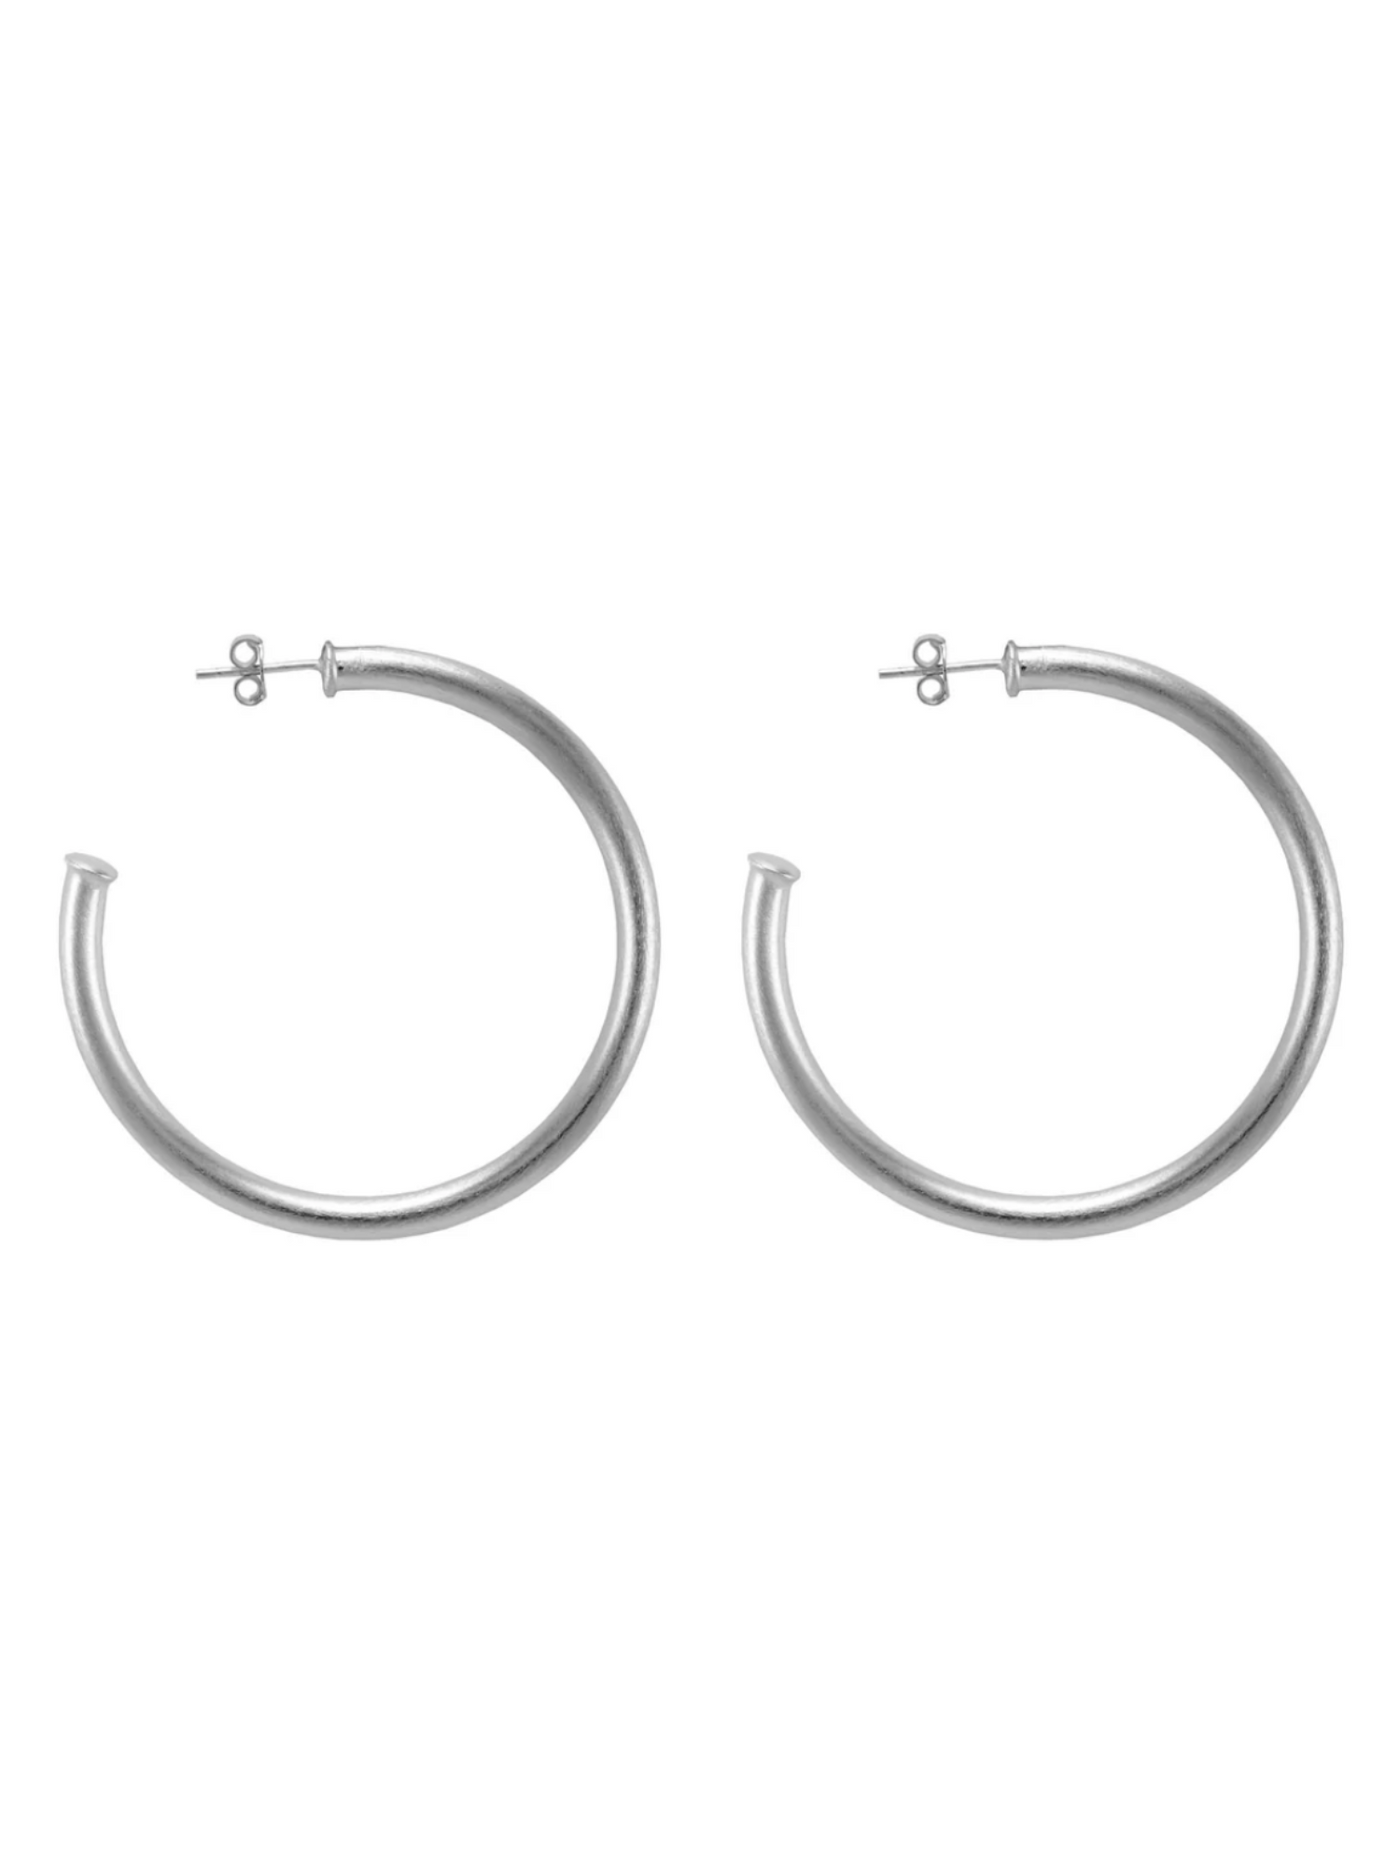 Shelia Fajl Small Everybody's Favorite Hoops in brushed silver on white background.